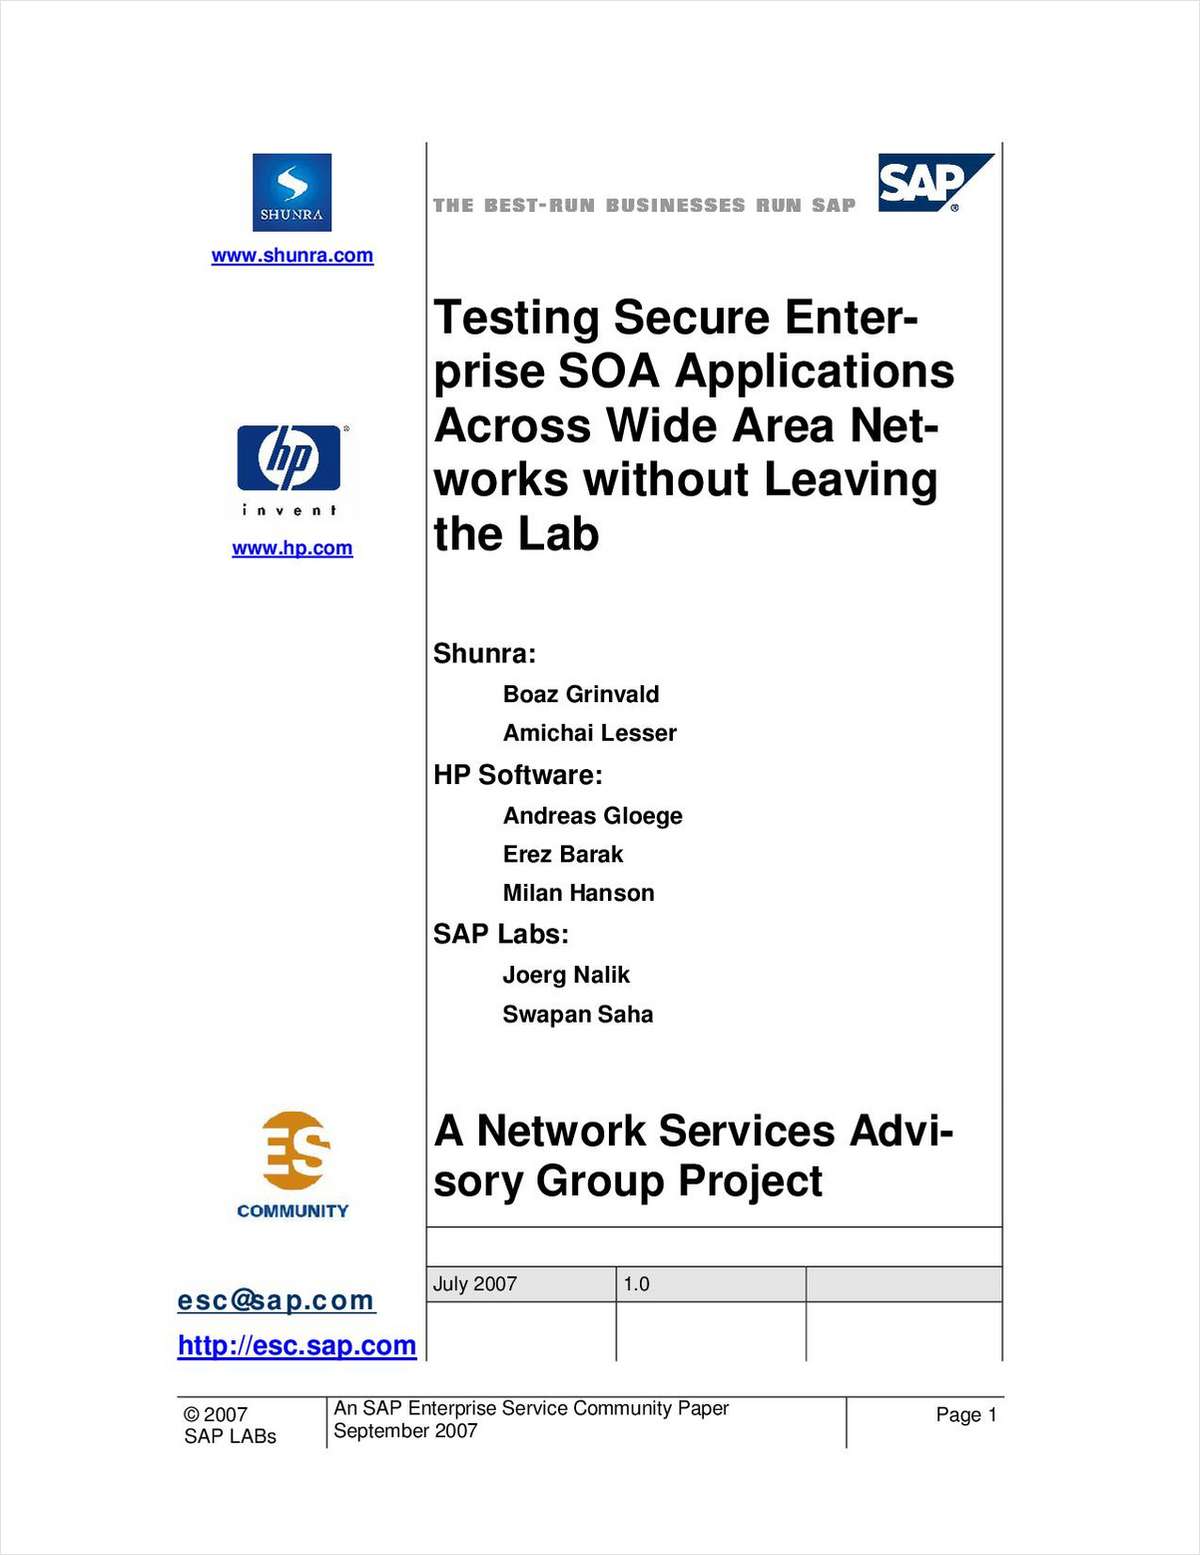 Testing Secure Enterprise SOA Applications Across Wide Area Networks without Leaving the Lab